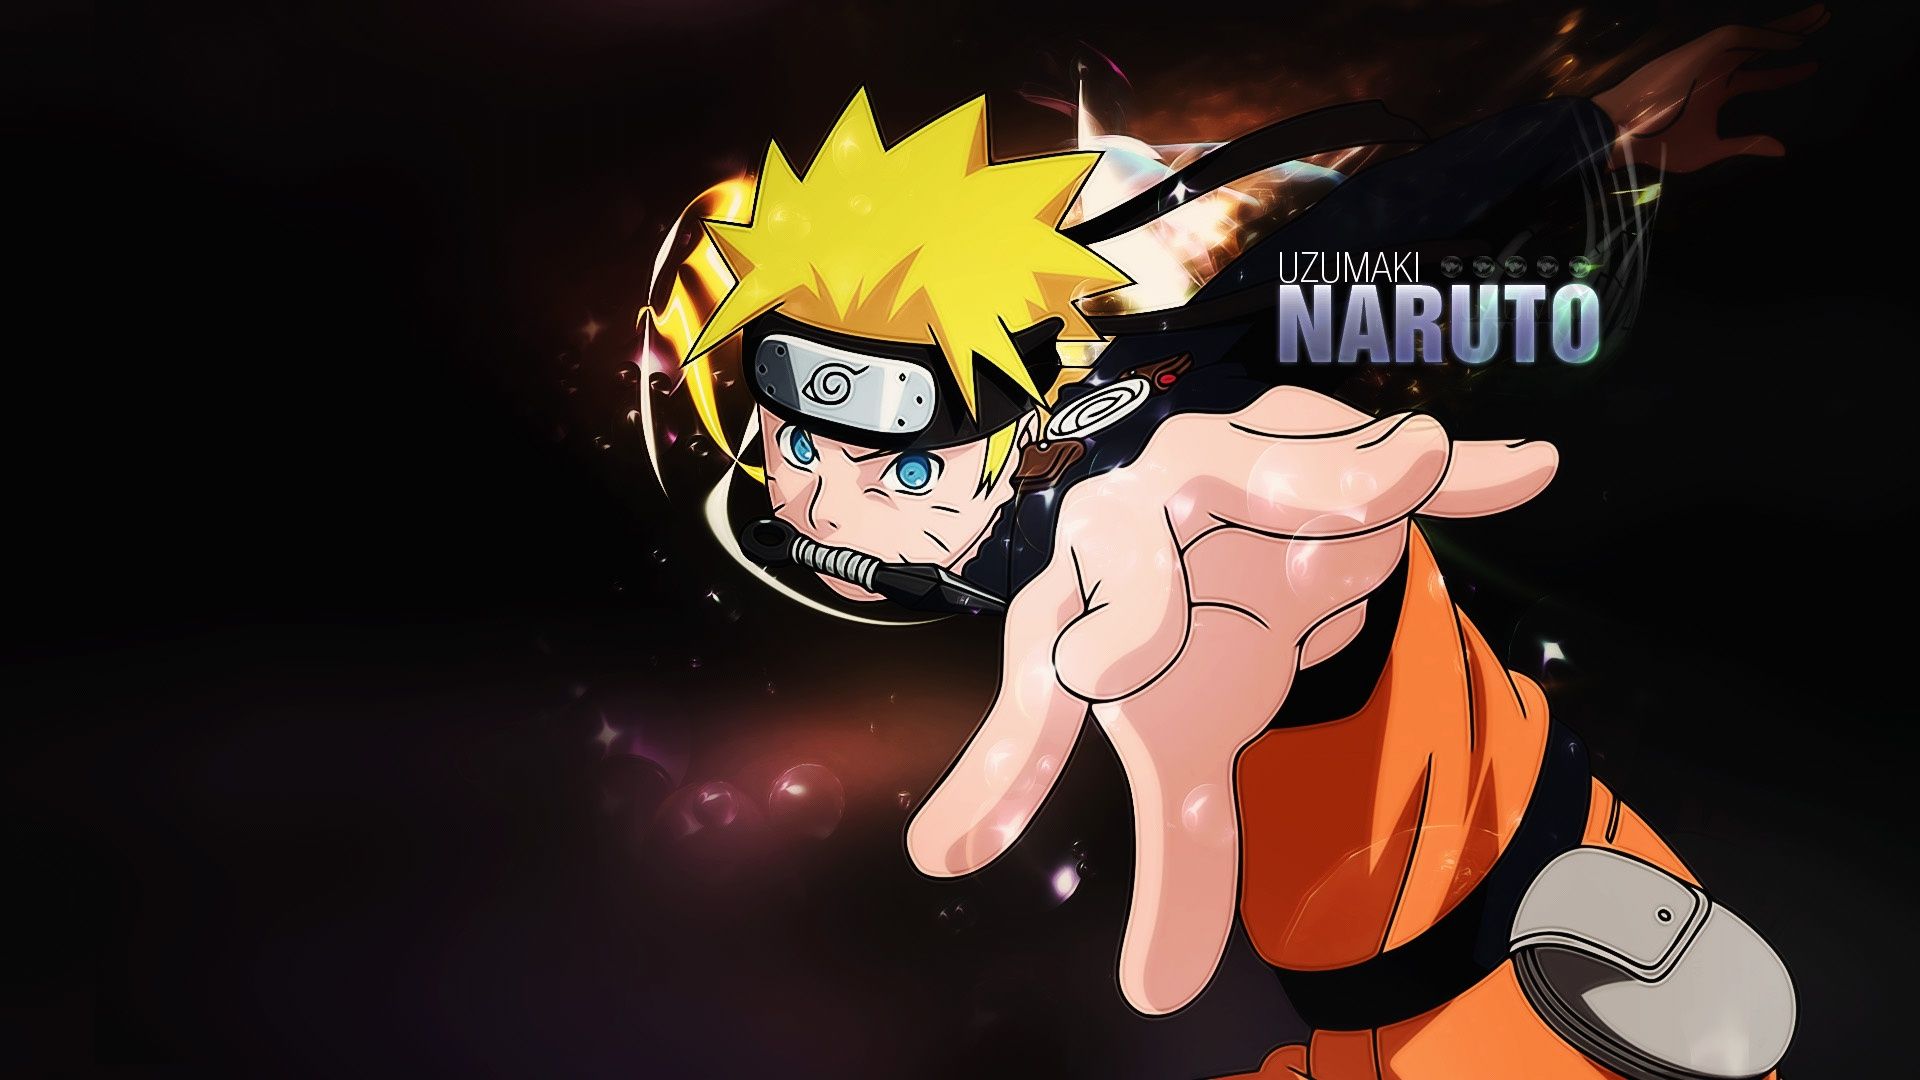 Naruto 4K wallpaper for your desktop or mobile screen free and easy to download